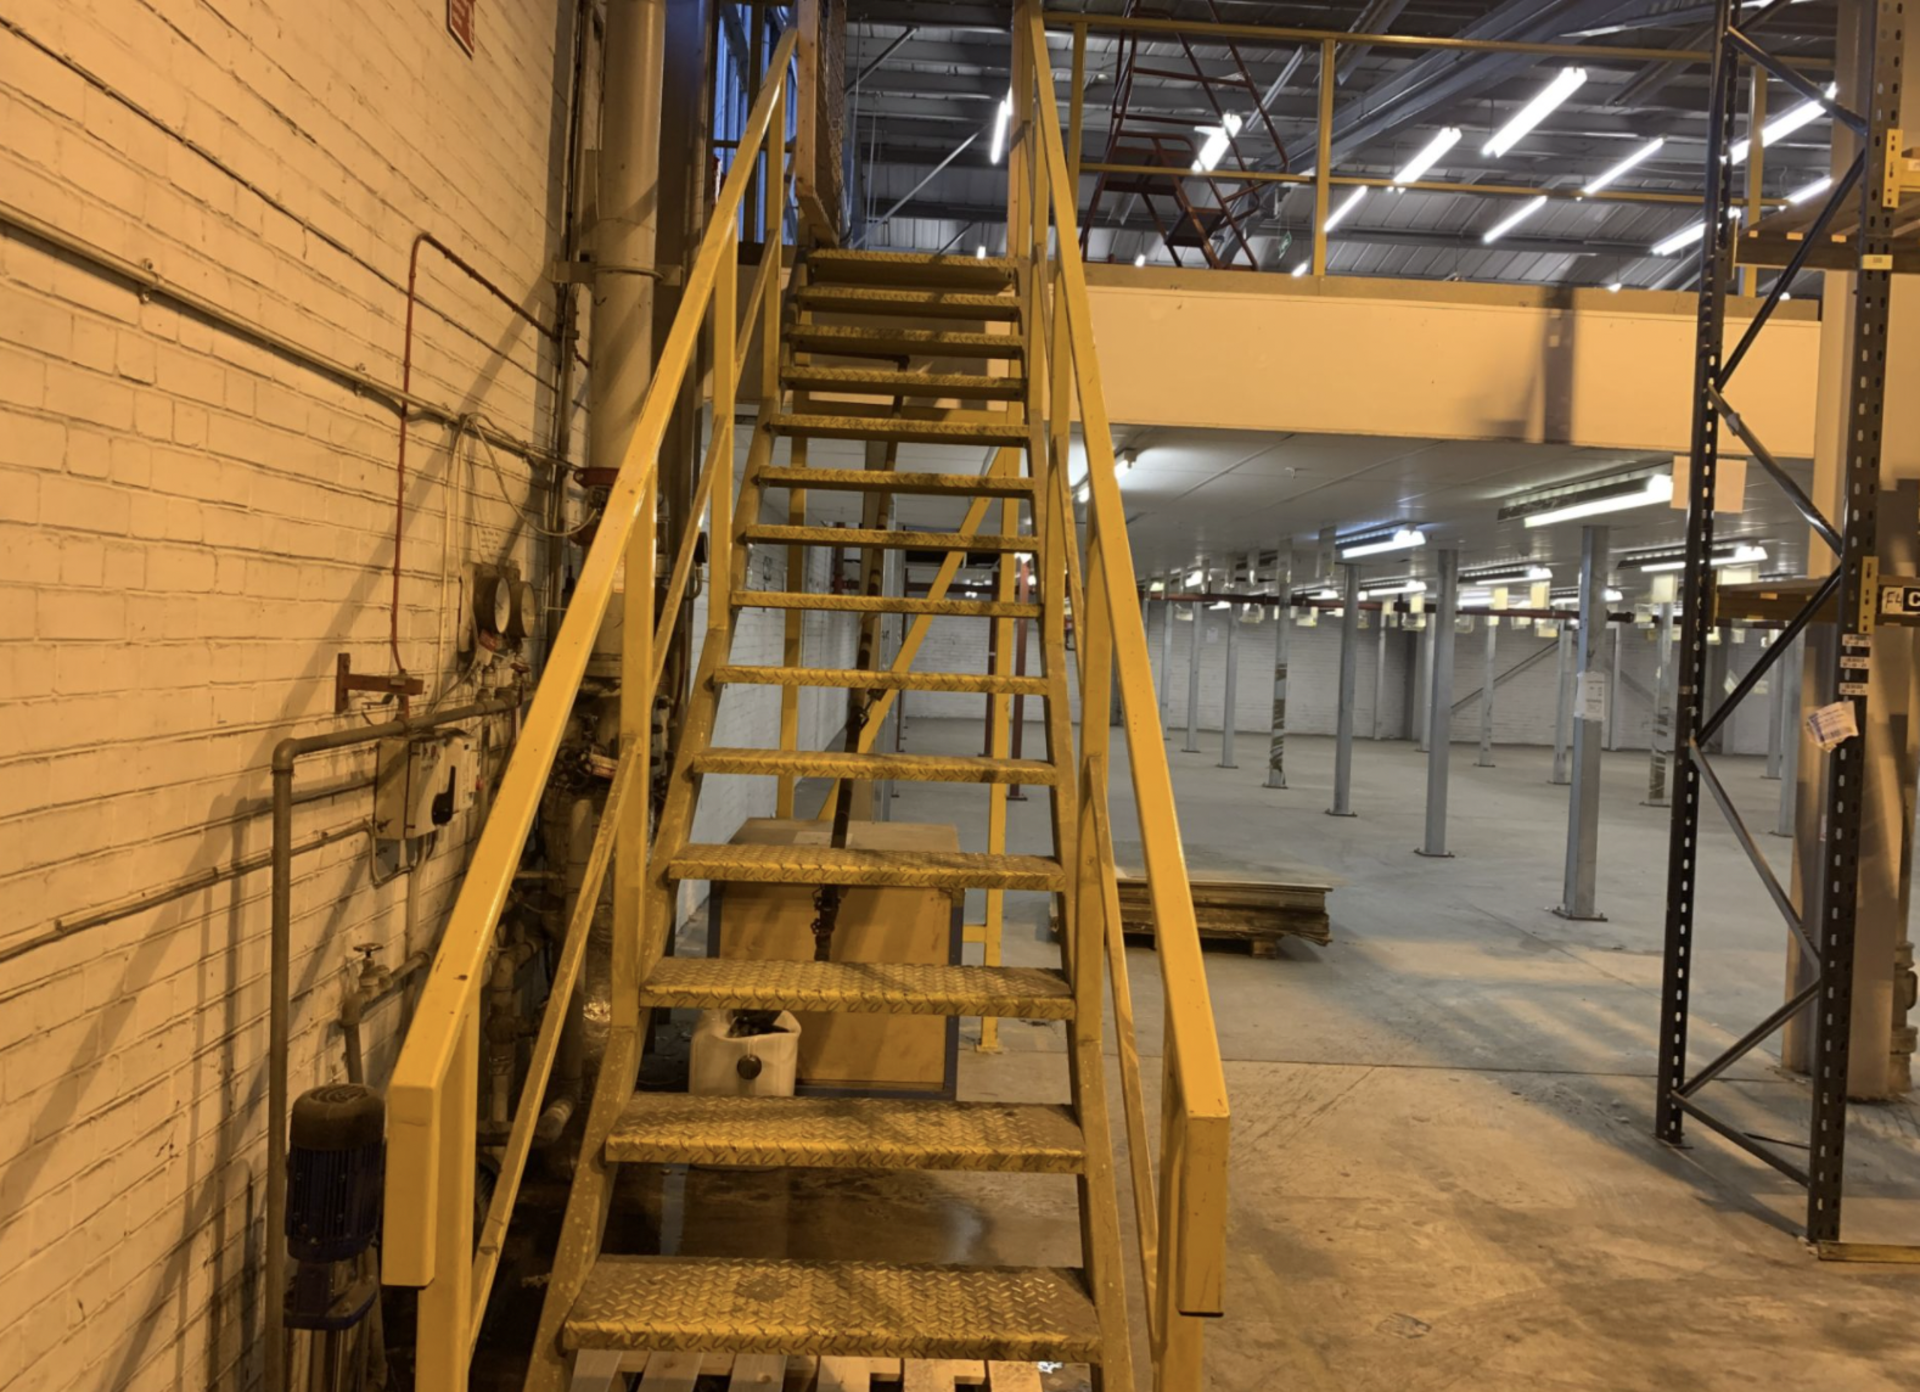 £500,000 MEZZANINE FLOOR 80m x 28m 3 stairs and loading bay inc - Image 3 of 21